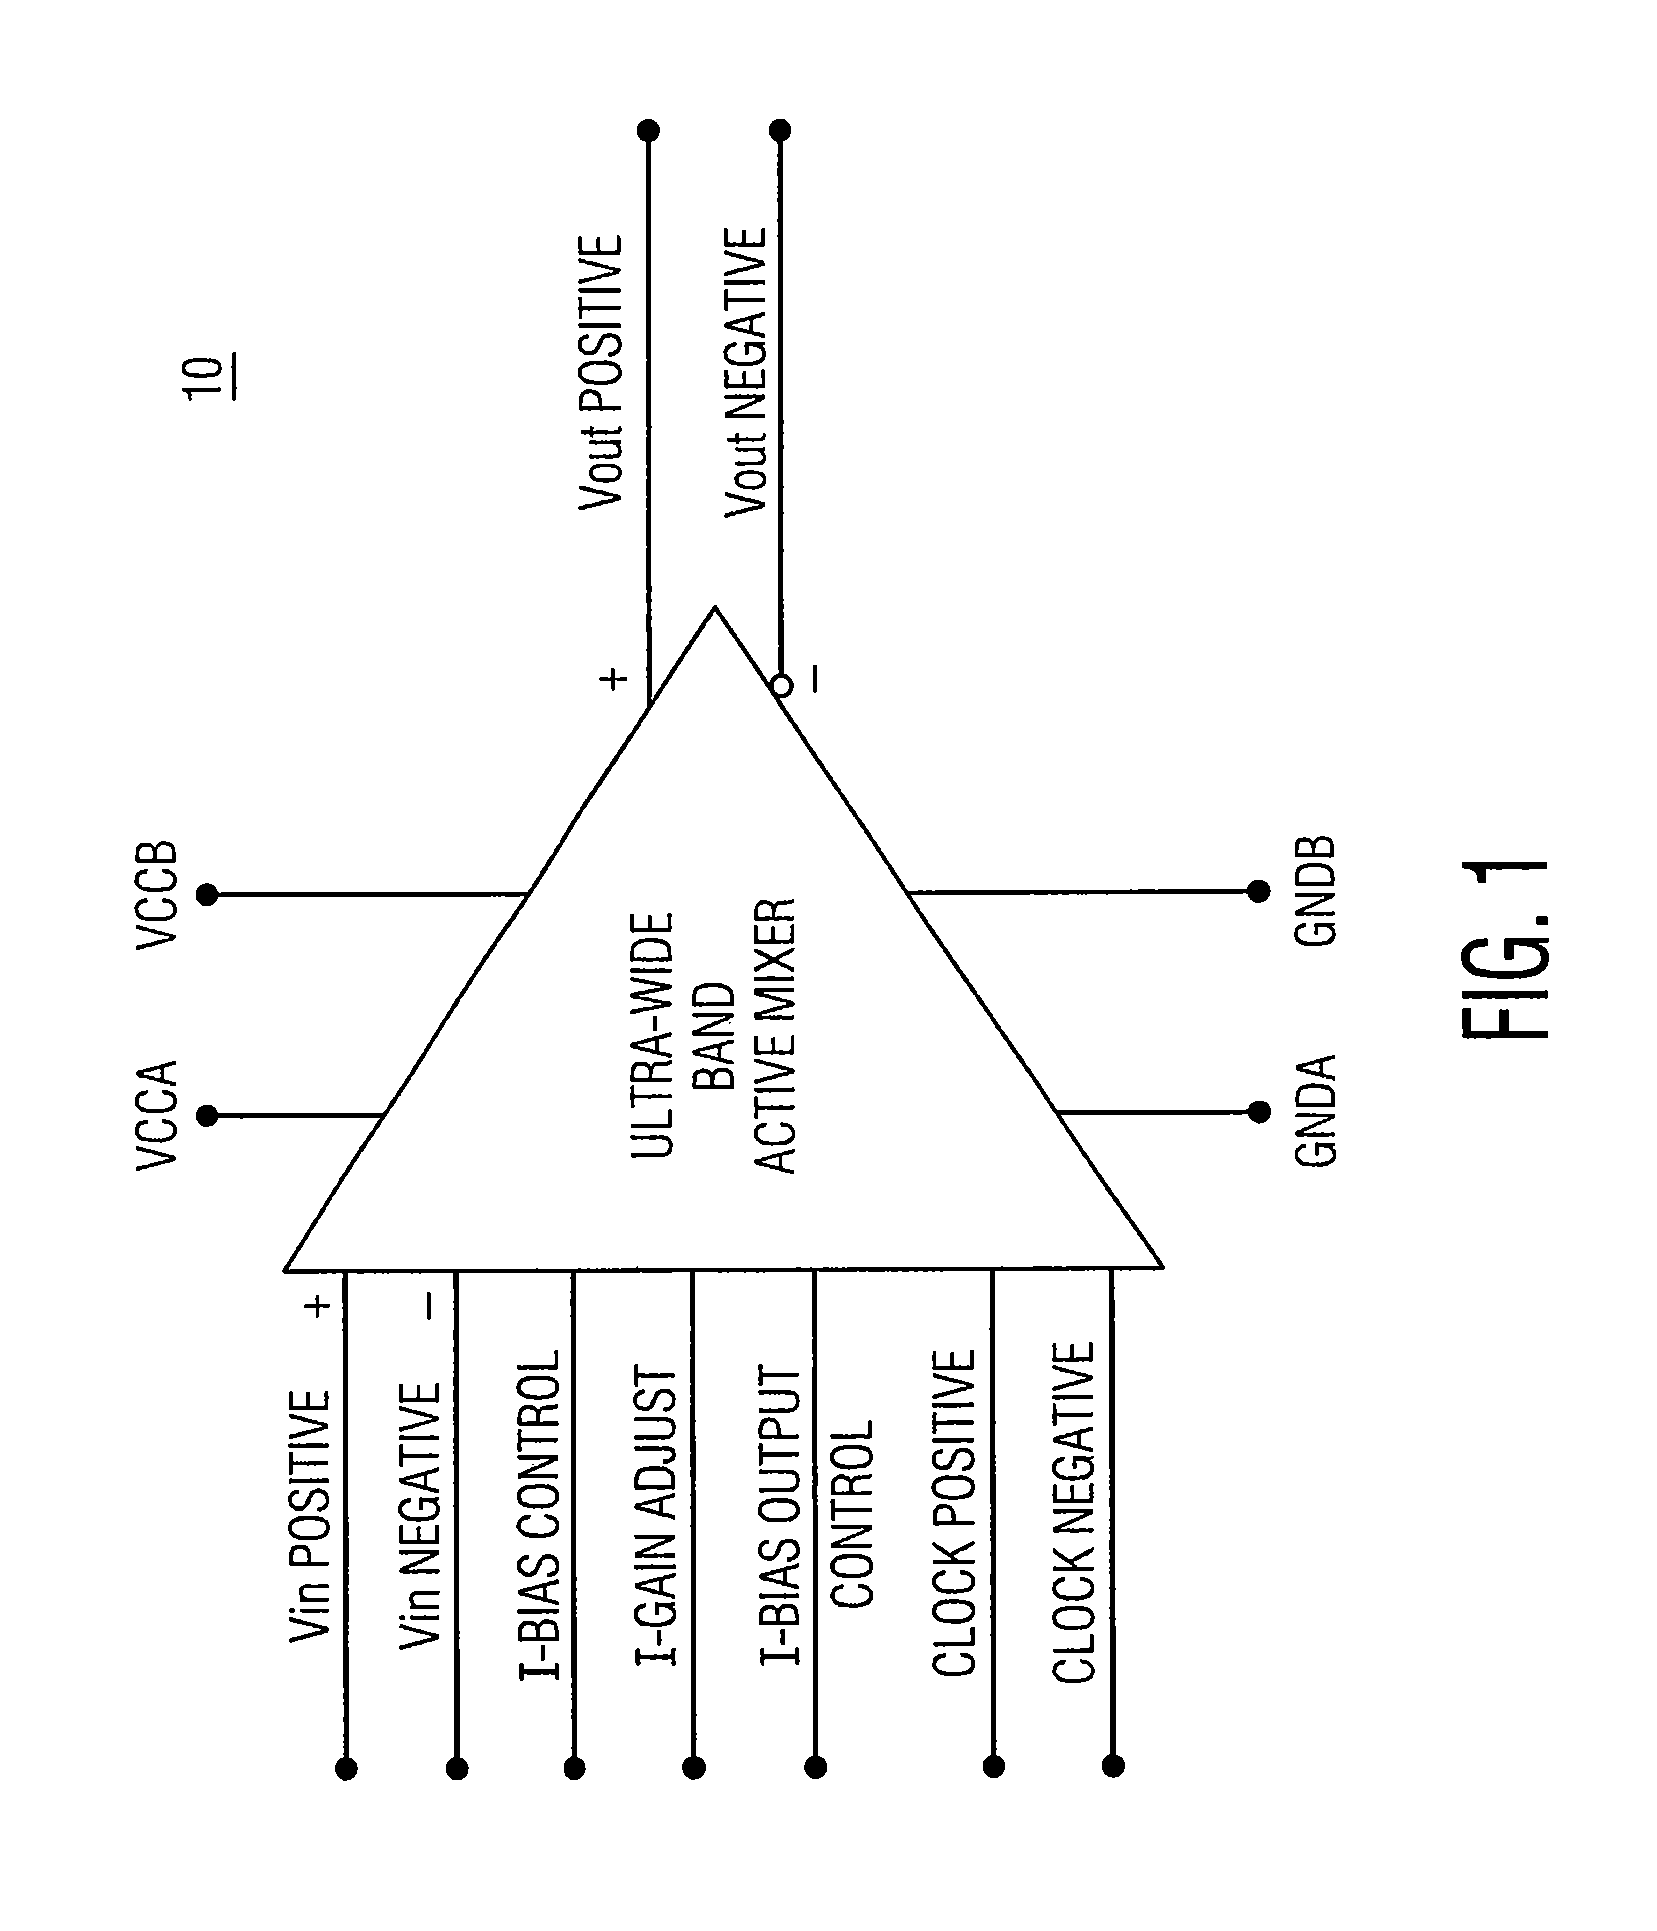 Ultra wide band, differential input/output, high frequency active mixer in an integrated circuit